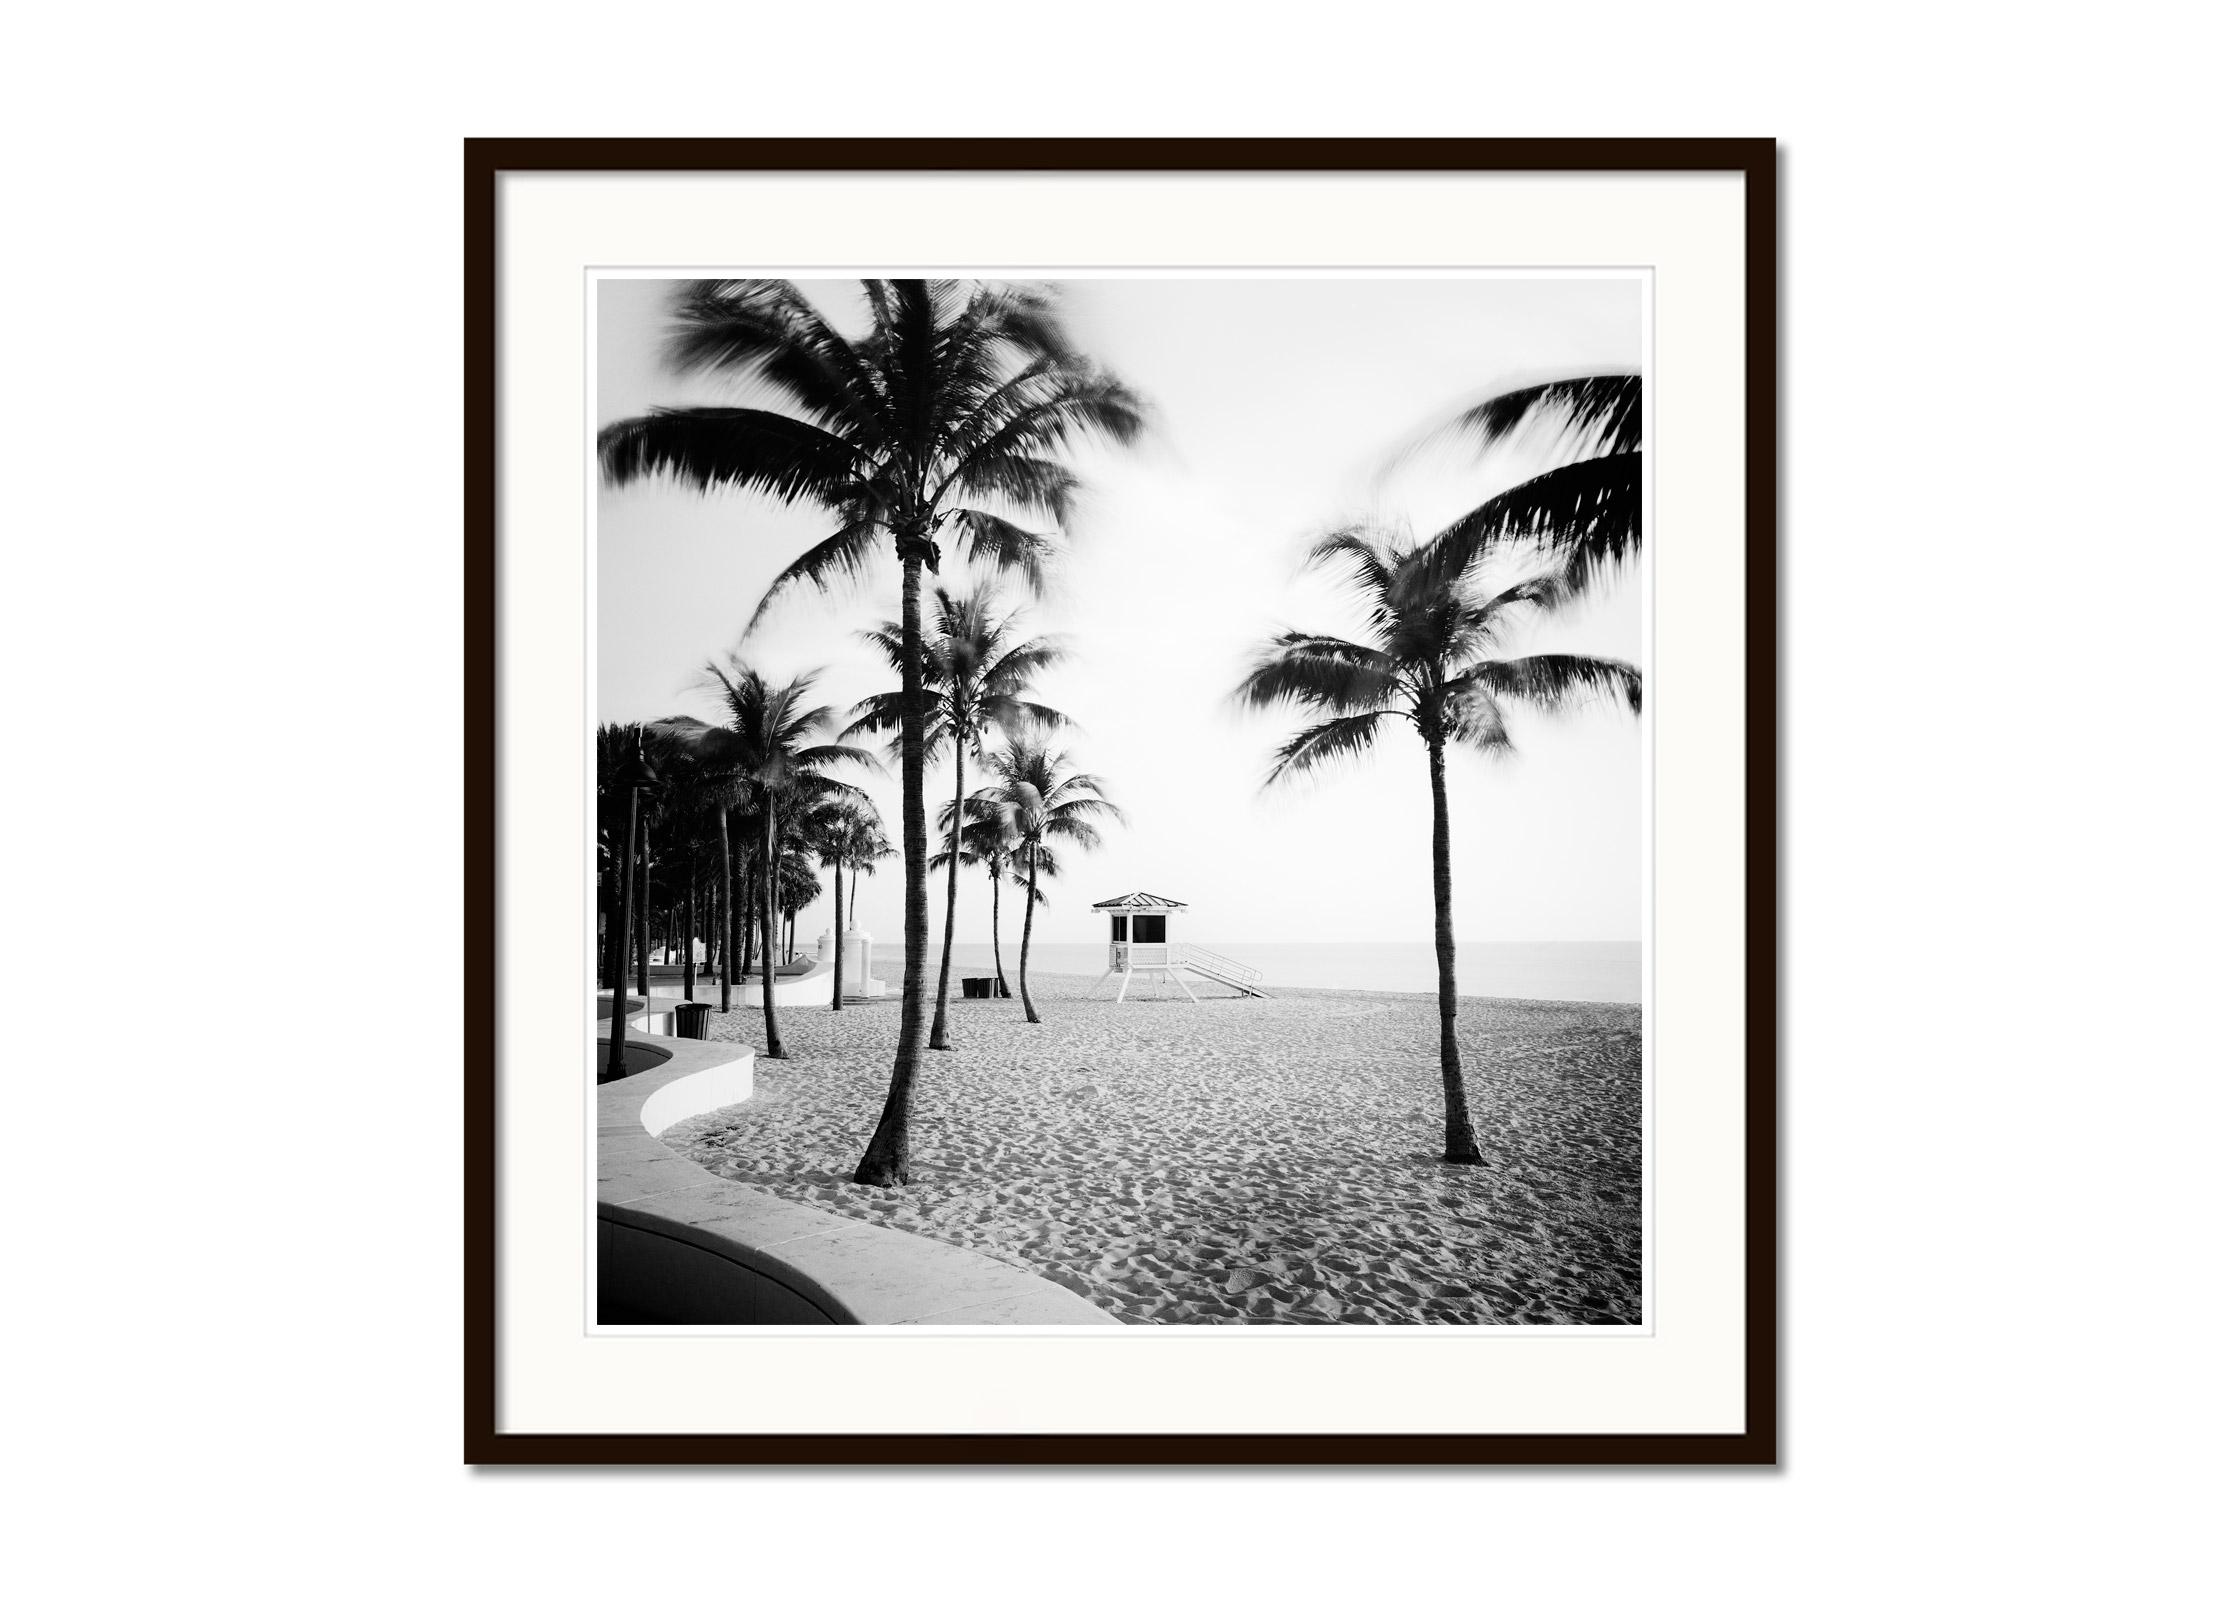 Black and white fine art landscape photography print. Lifeguard tower with palm trees on Fort Lauderdale's sandy Beach, Florida, USA. Archival pigment ink print, edition of 9. Signed, titled, dated and numbered by artist. Certificate of authenticity